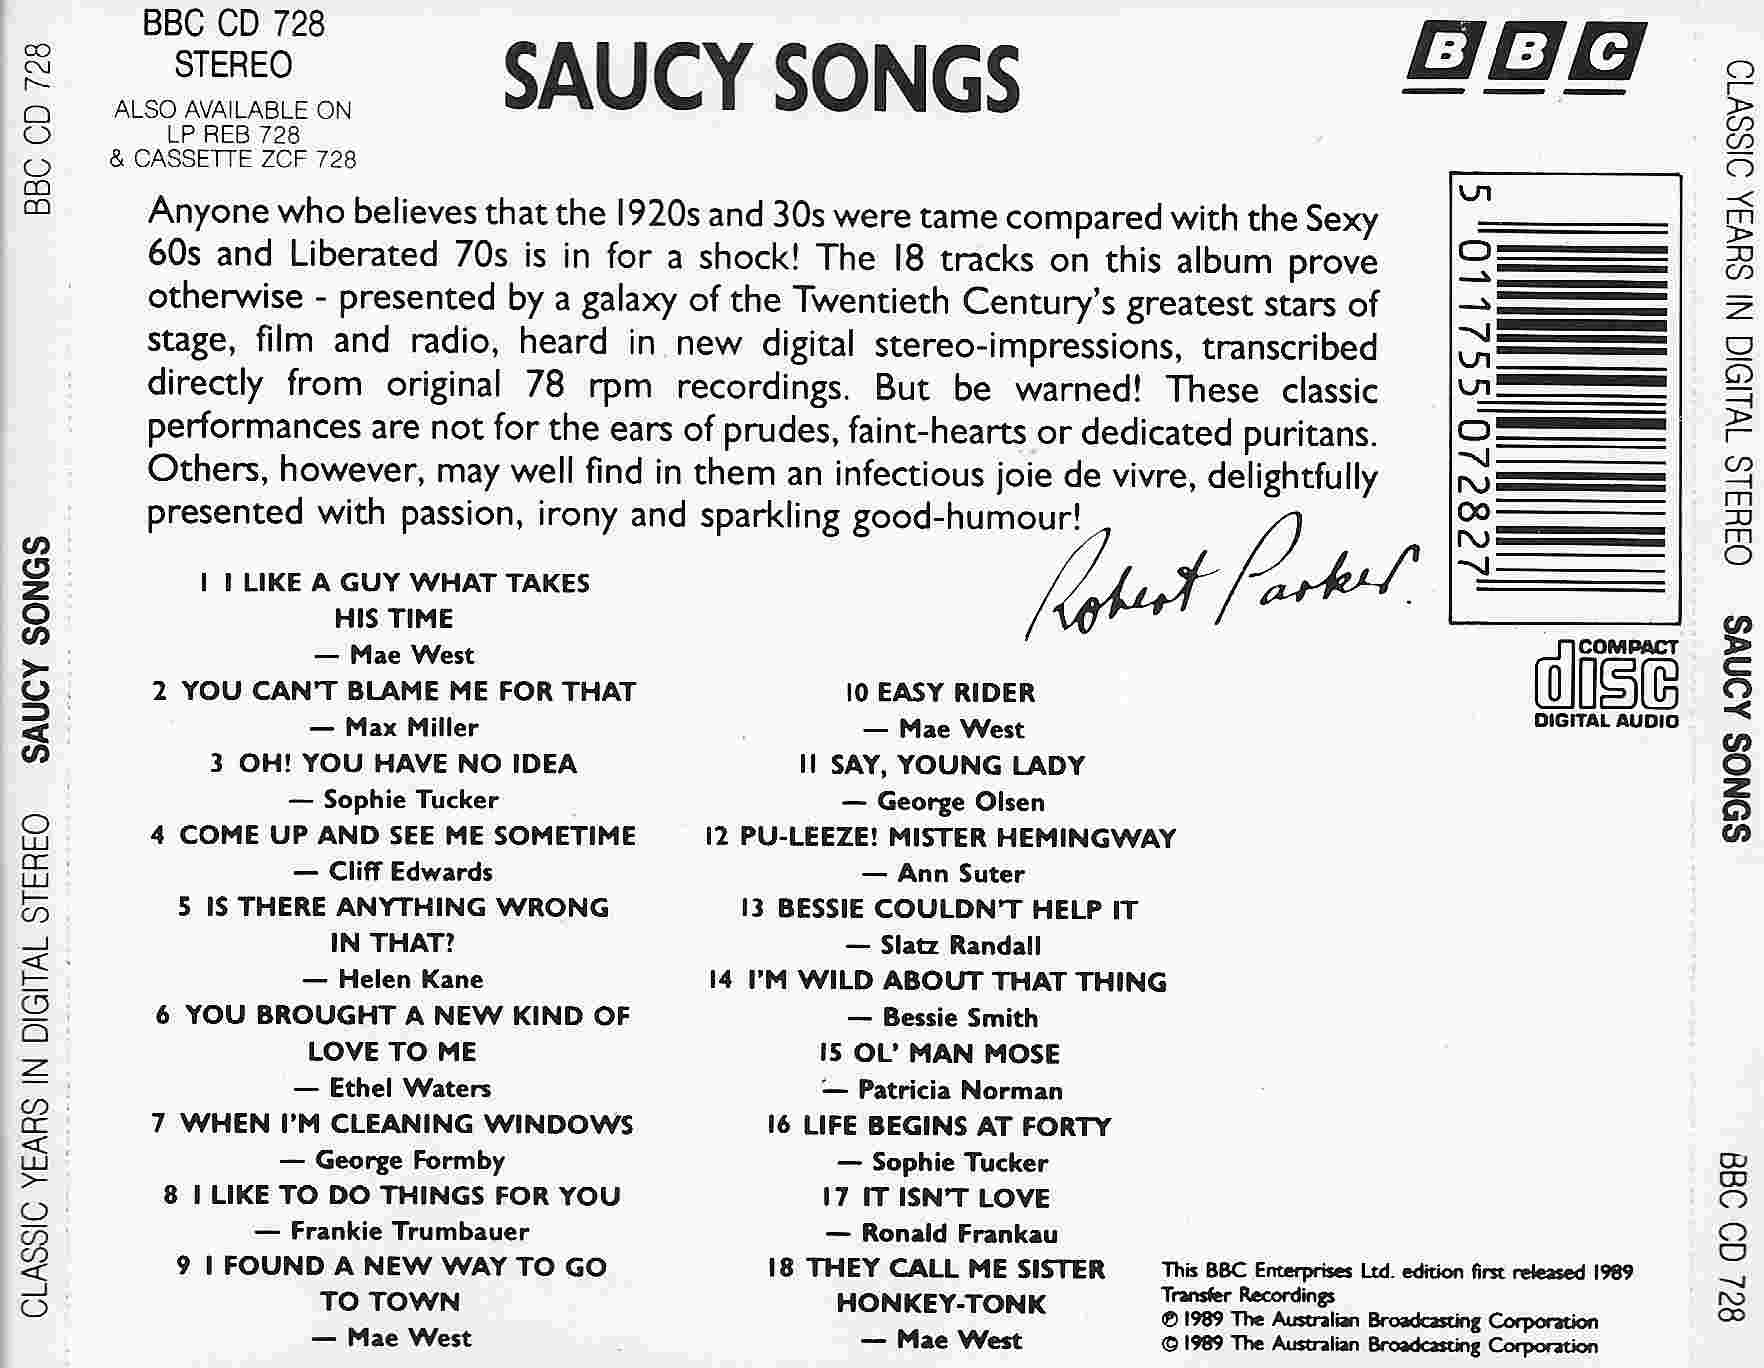 Picture of BBCCD728 Classic years - Saucy songs by artist Various from the BBC records and Tapes library